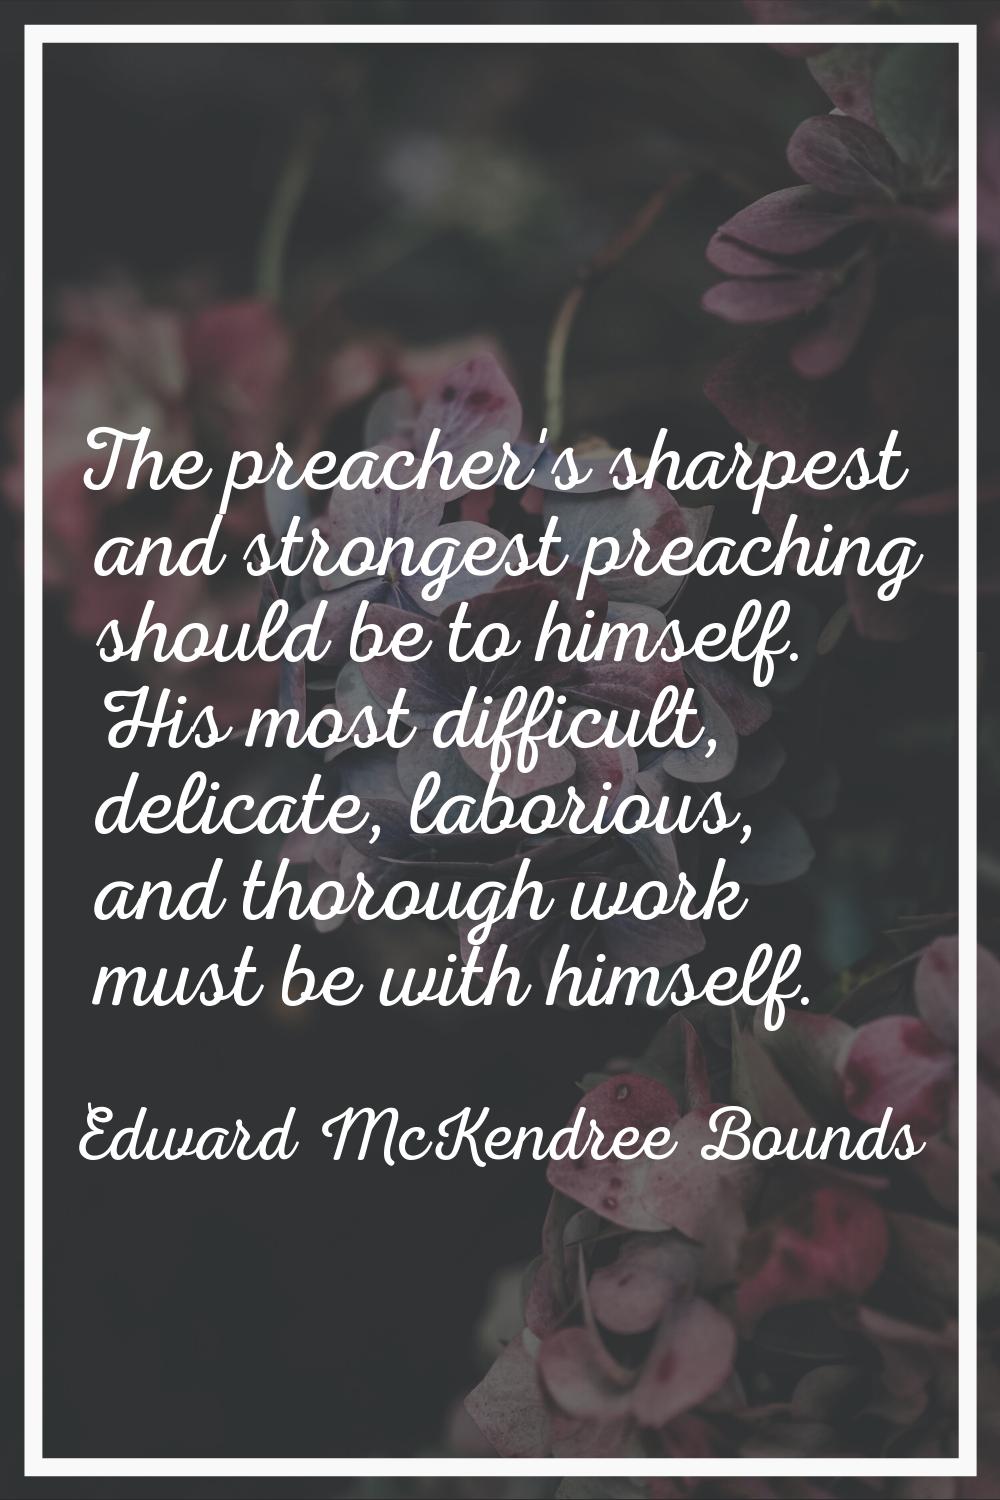 The preacher's sharpest and strongest preaching should be to himself. His most difficult, delicate,